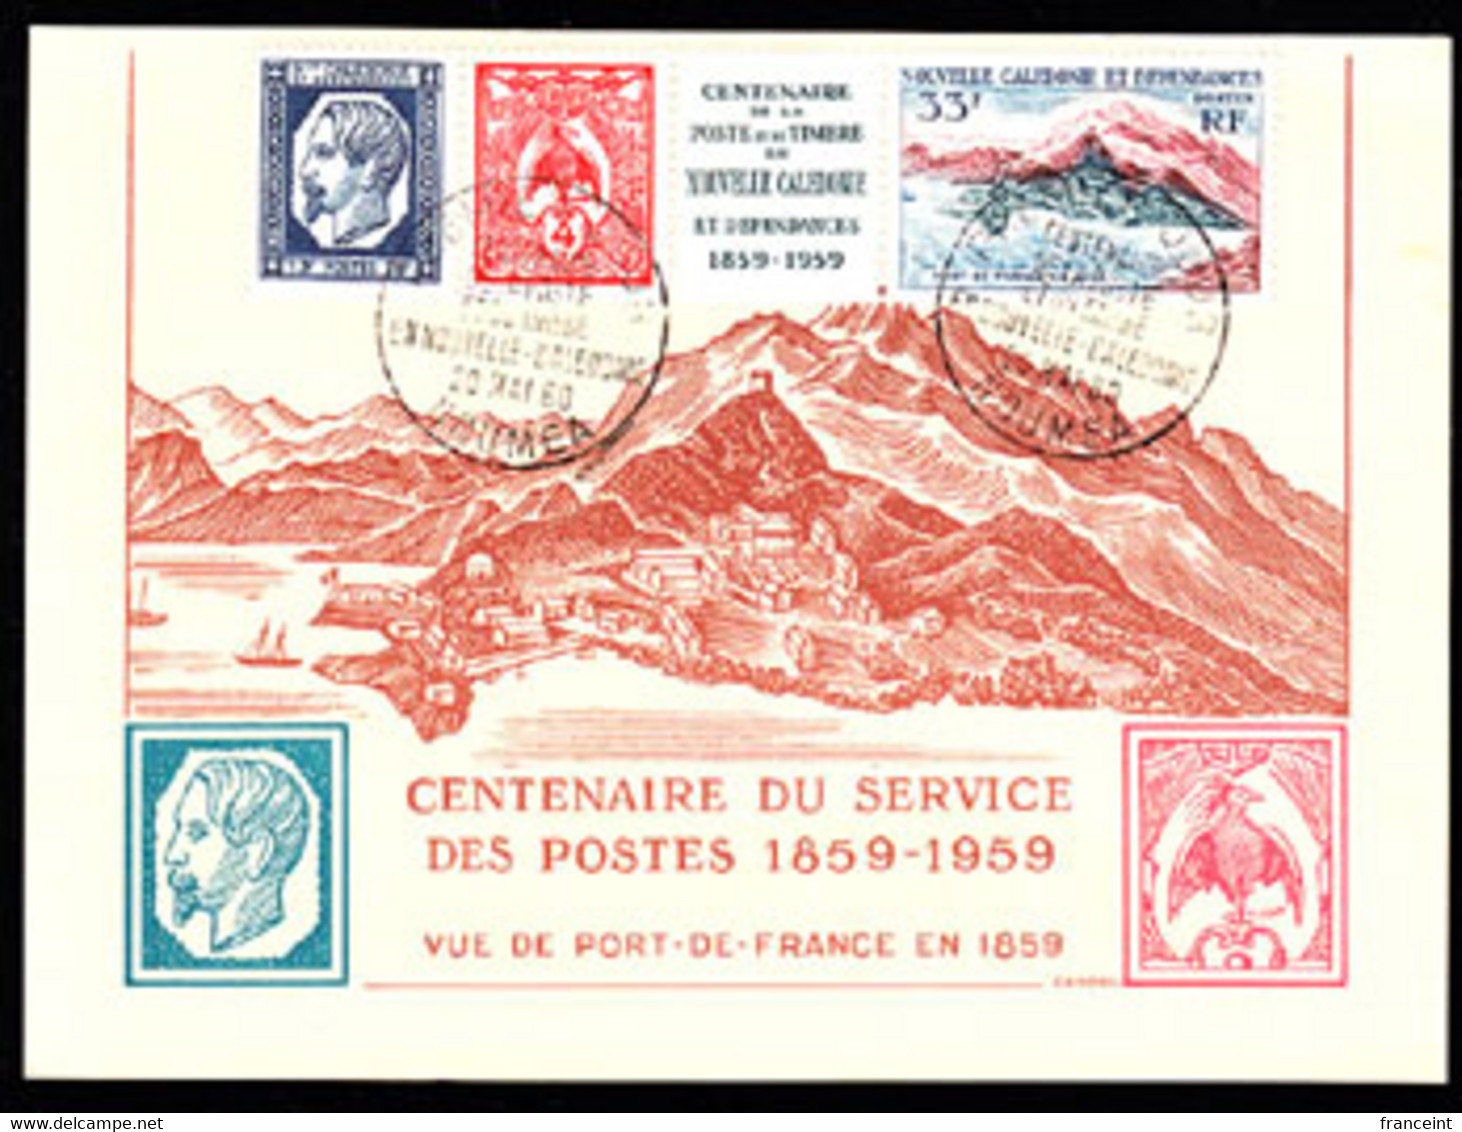 NEW CALEDONIA (1960) New Caledonia Stamp Centenary. Maximum Card With First Day Cancel. Scott No 317a, Yvert No BF2. - Cartes-maximum